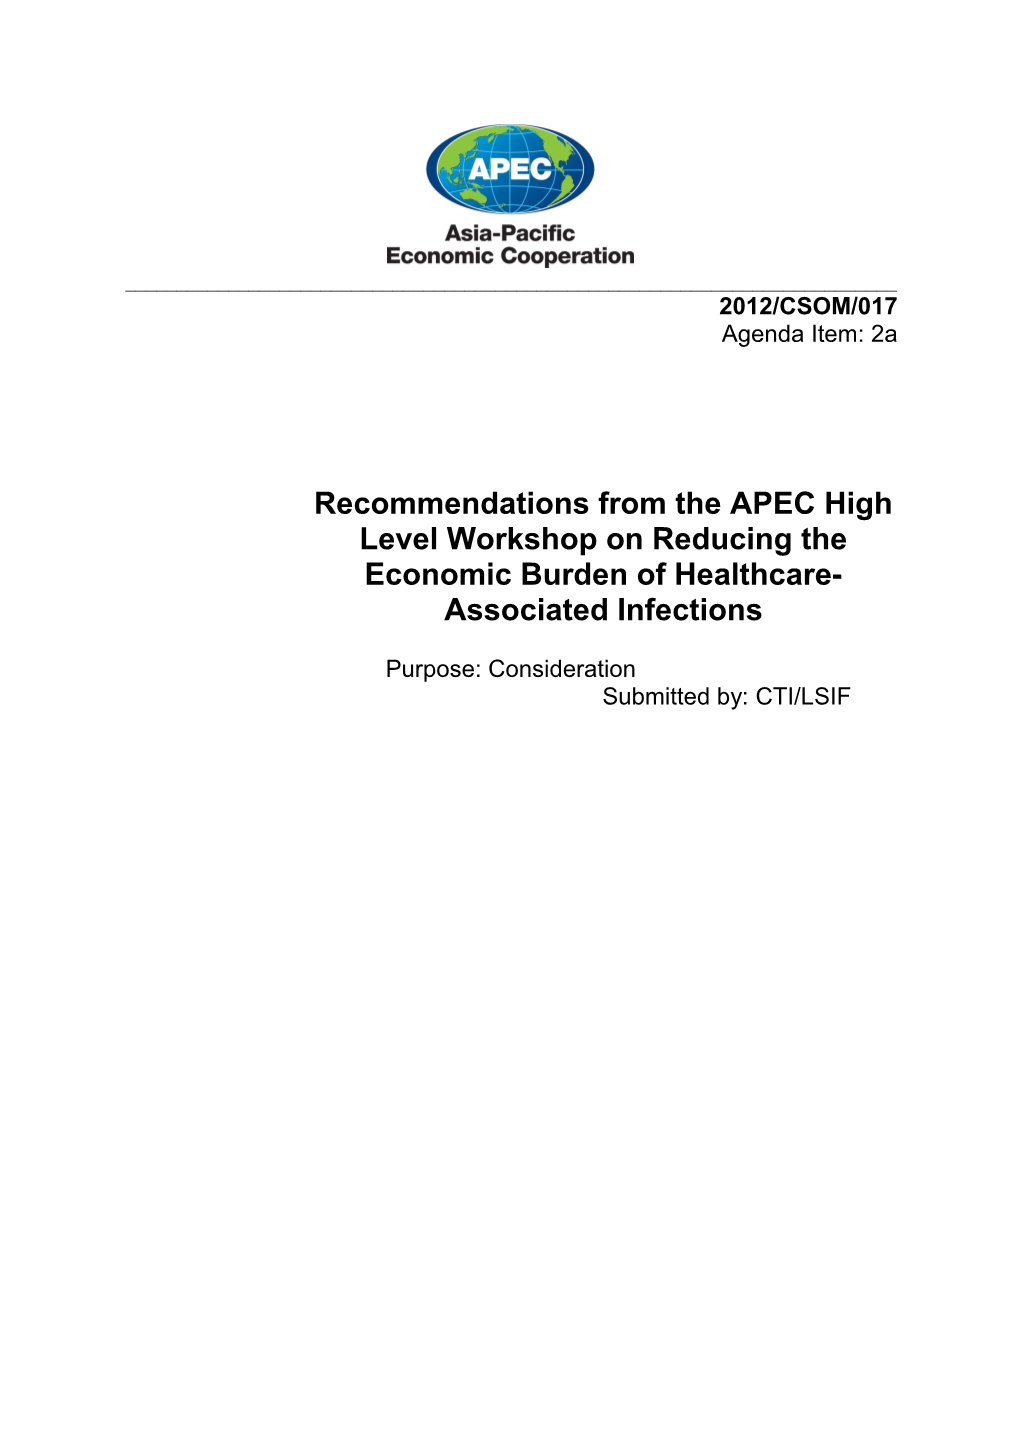 Recommendations from the APEC High-Level Workshop on Reducing the Economic Burden Of